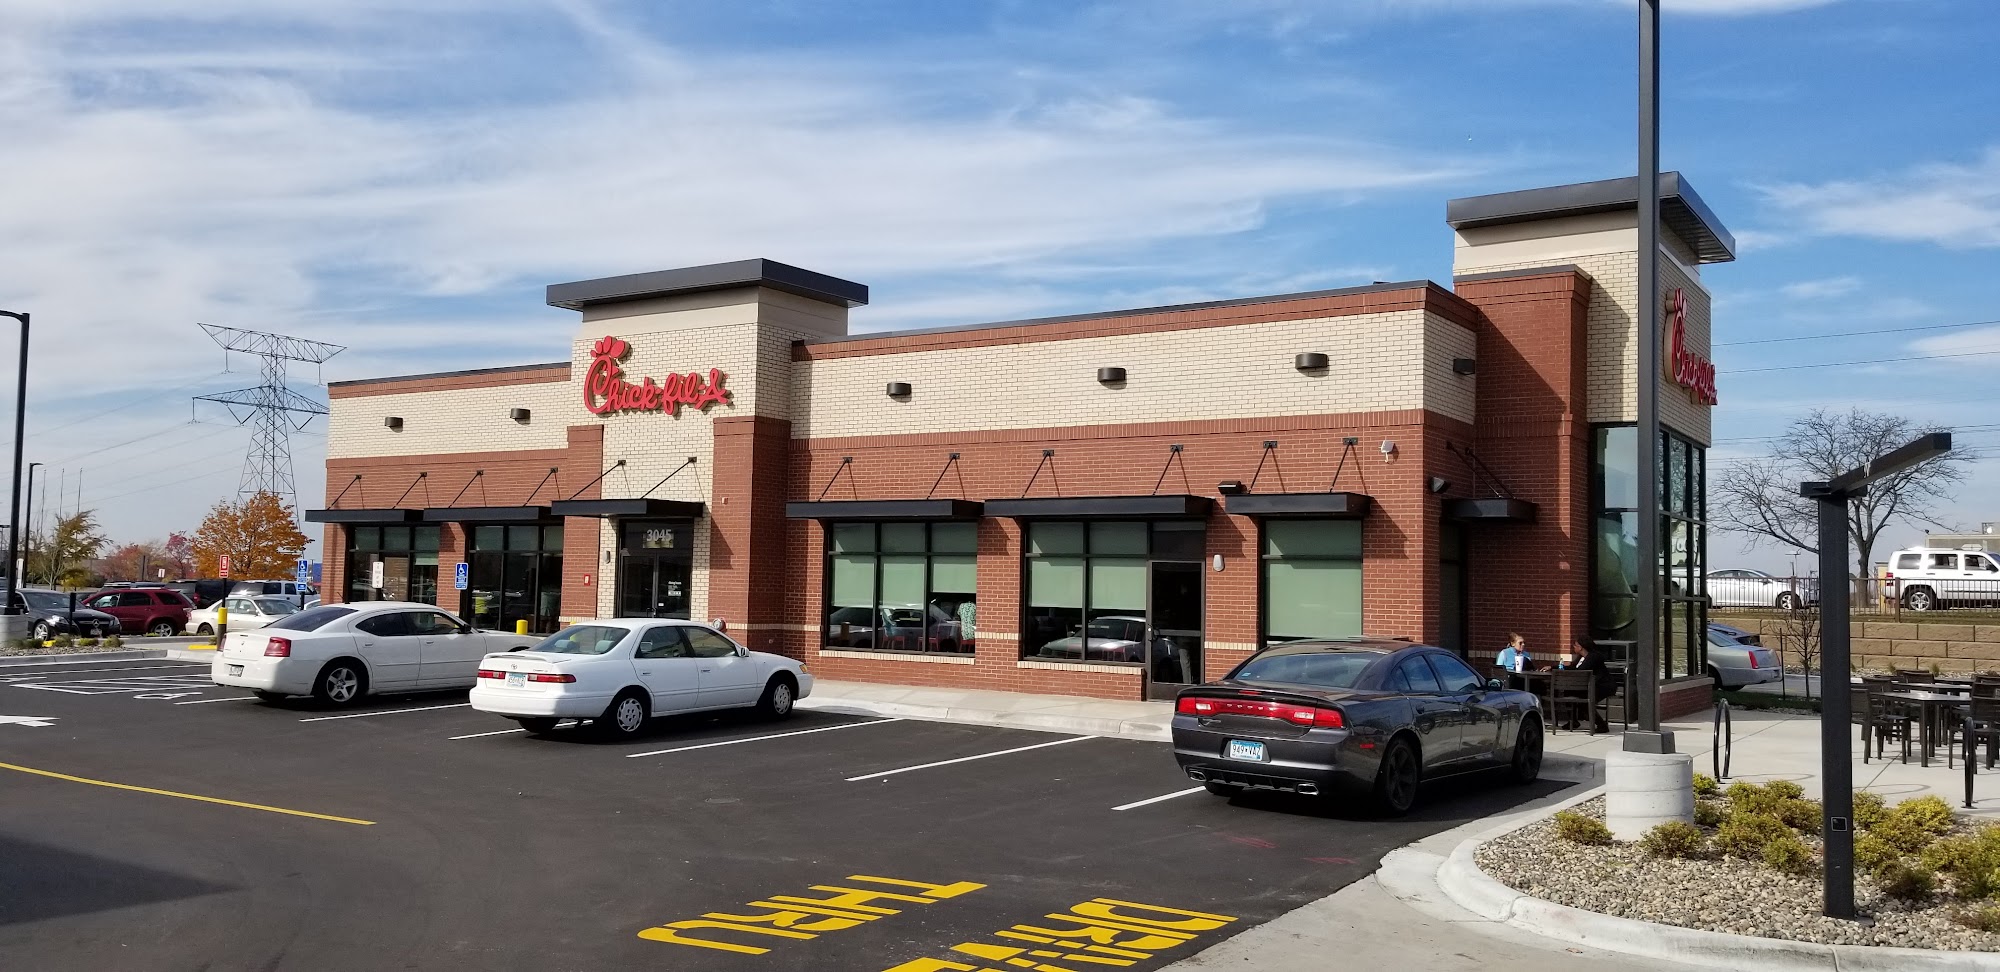 Chick-fil-A Maplewood